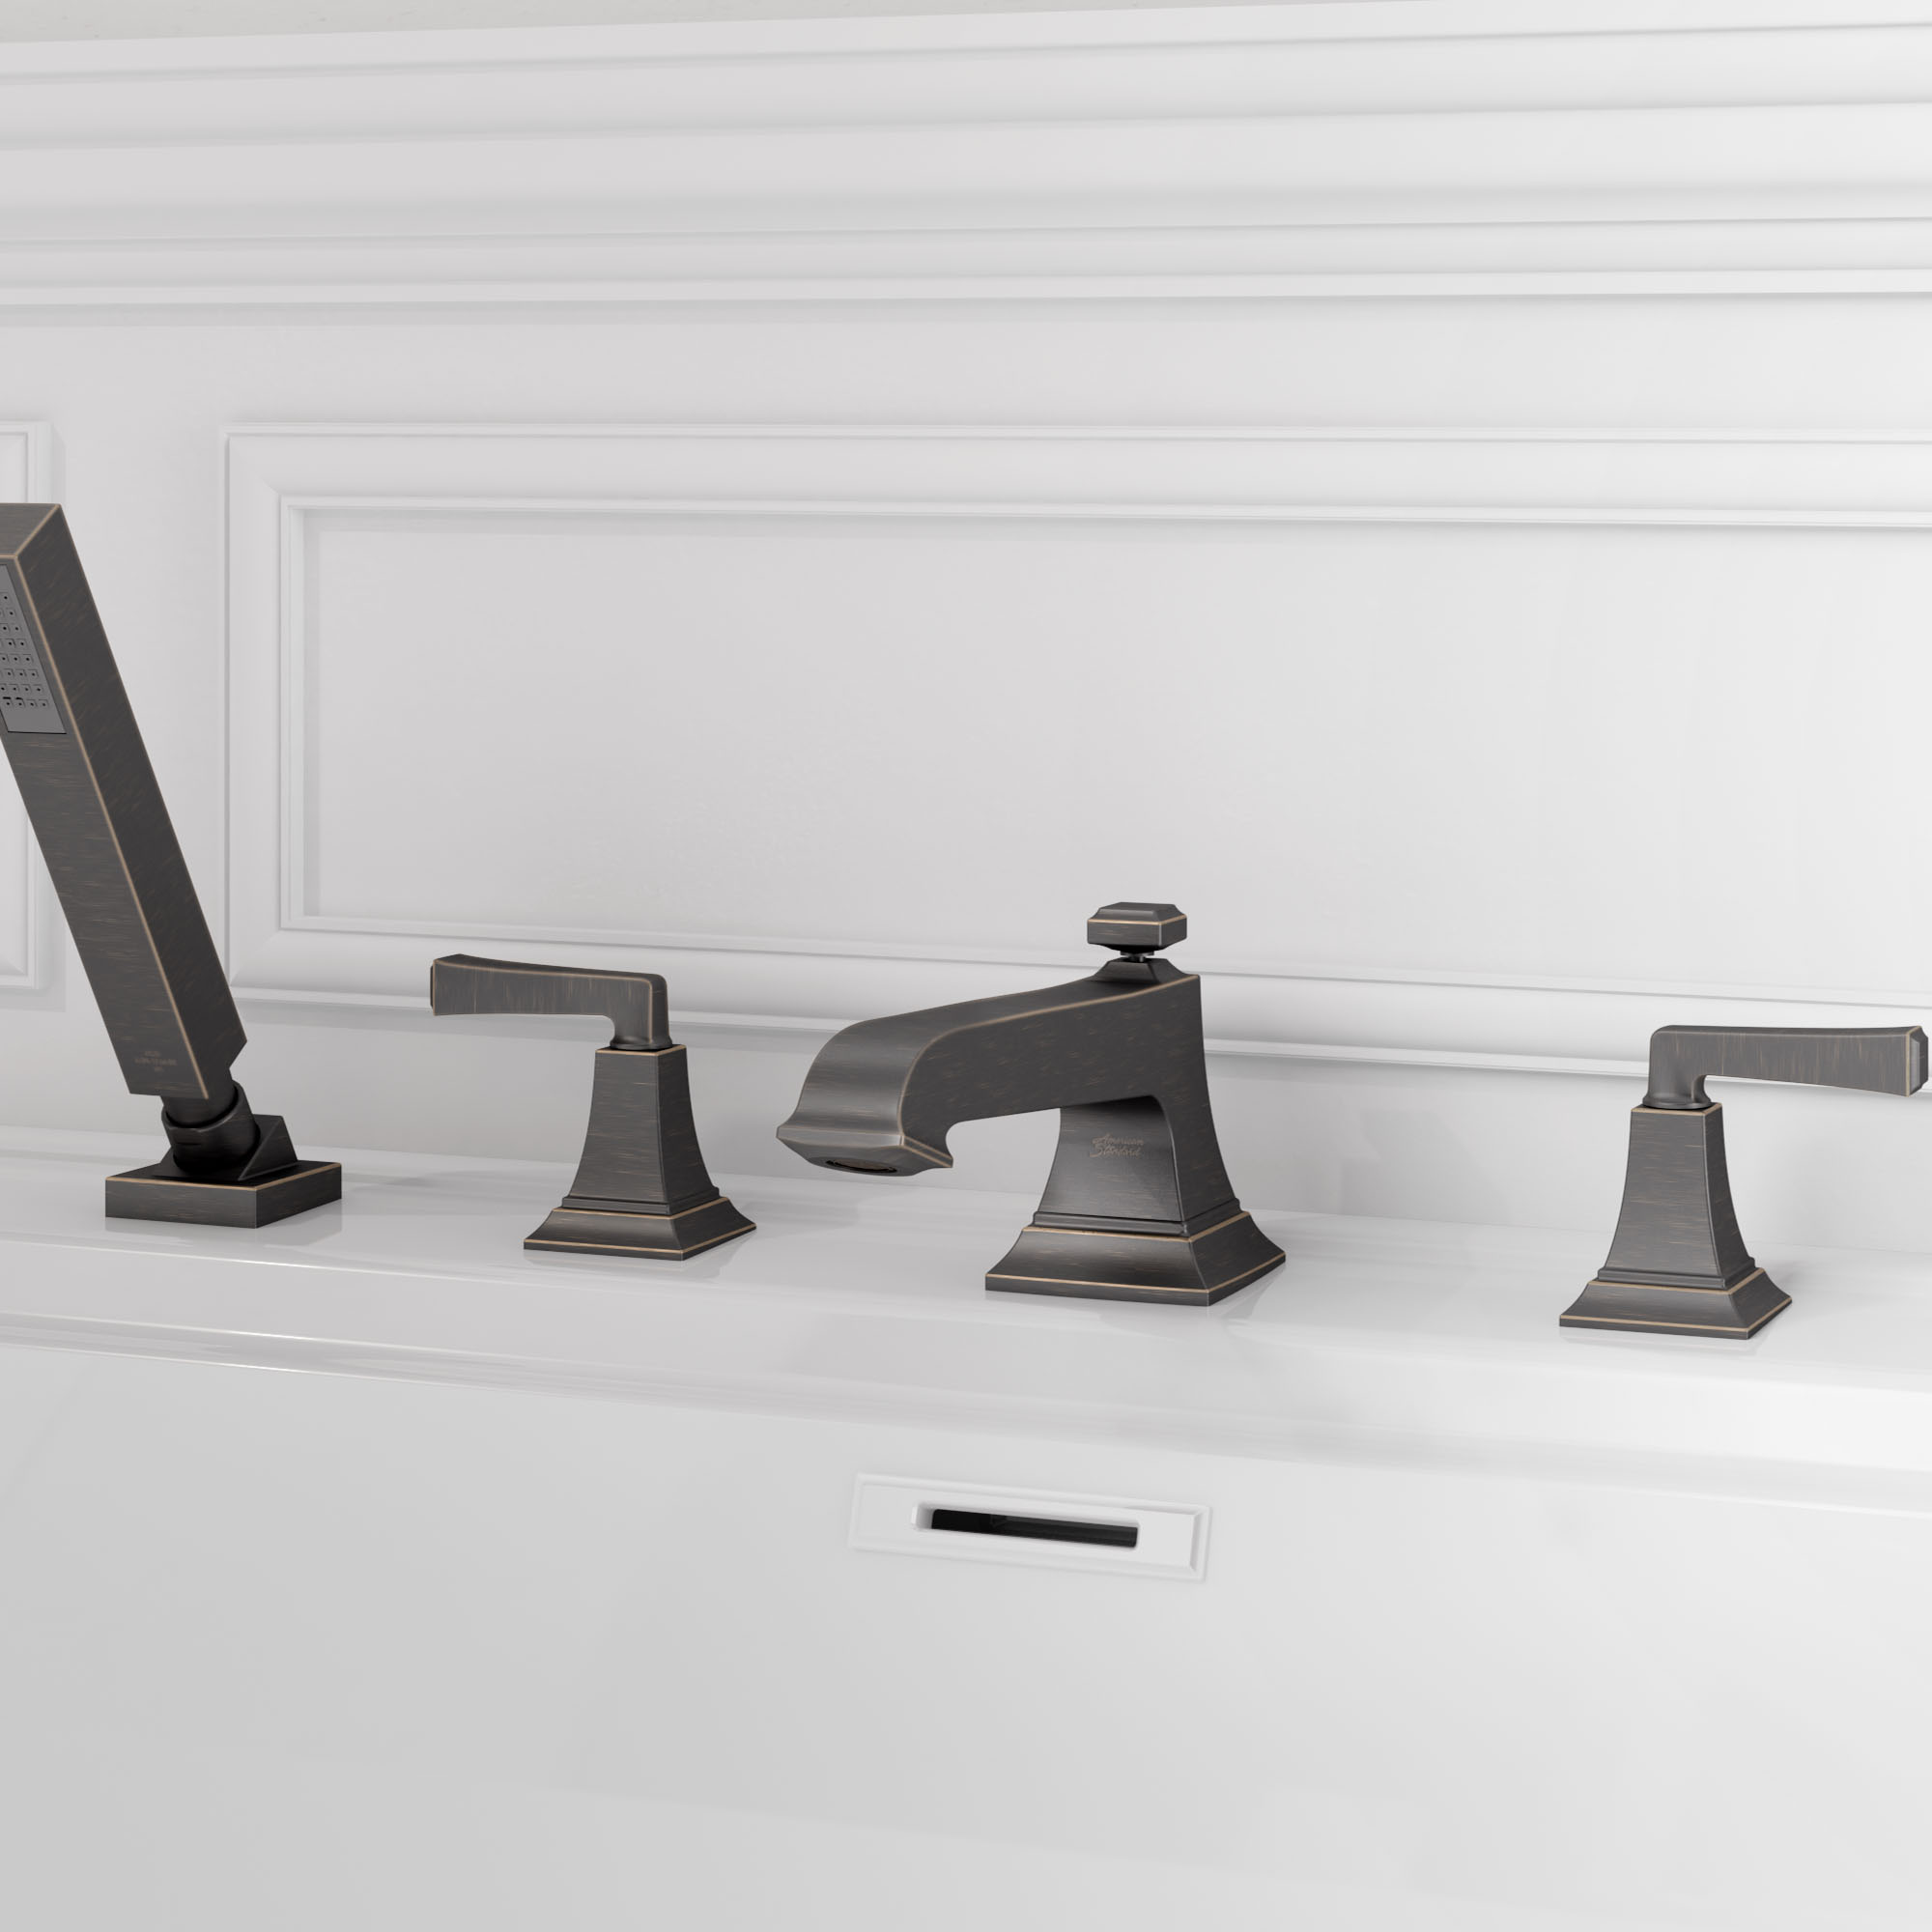 Town Square™ S Bathub Faucet With Lever Handles and Personal Shower for Flash™ Rough-in Valve